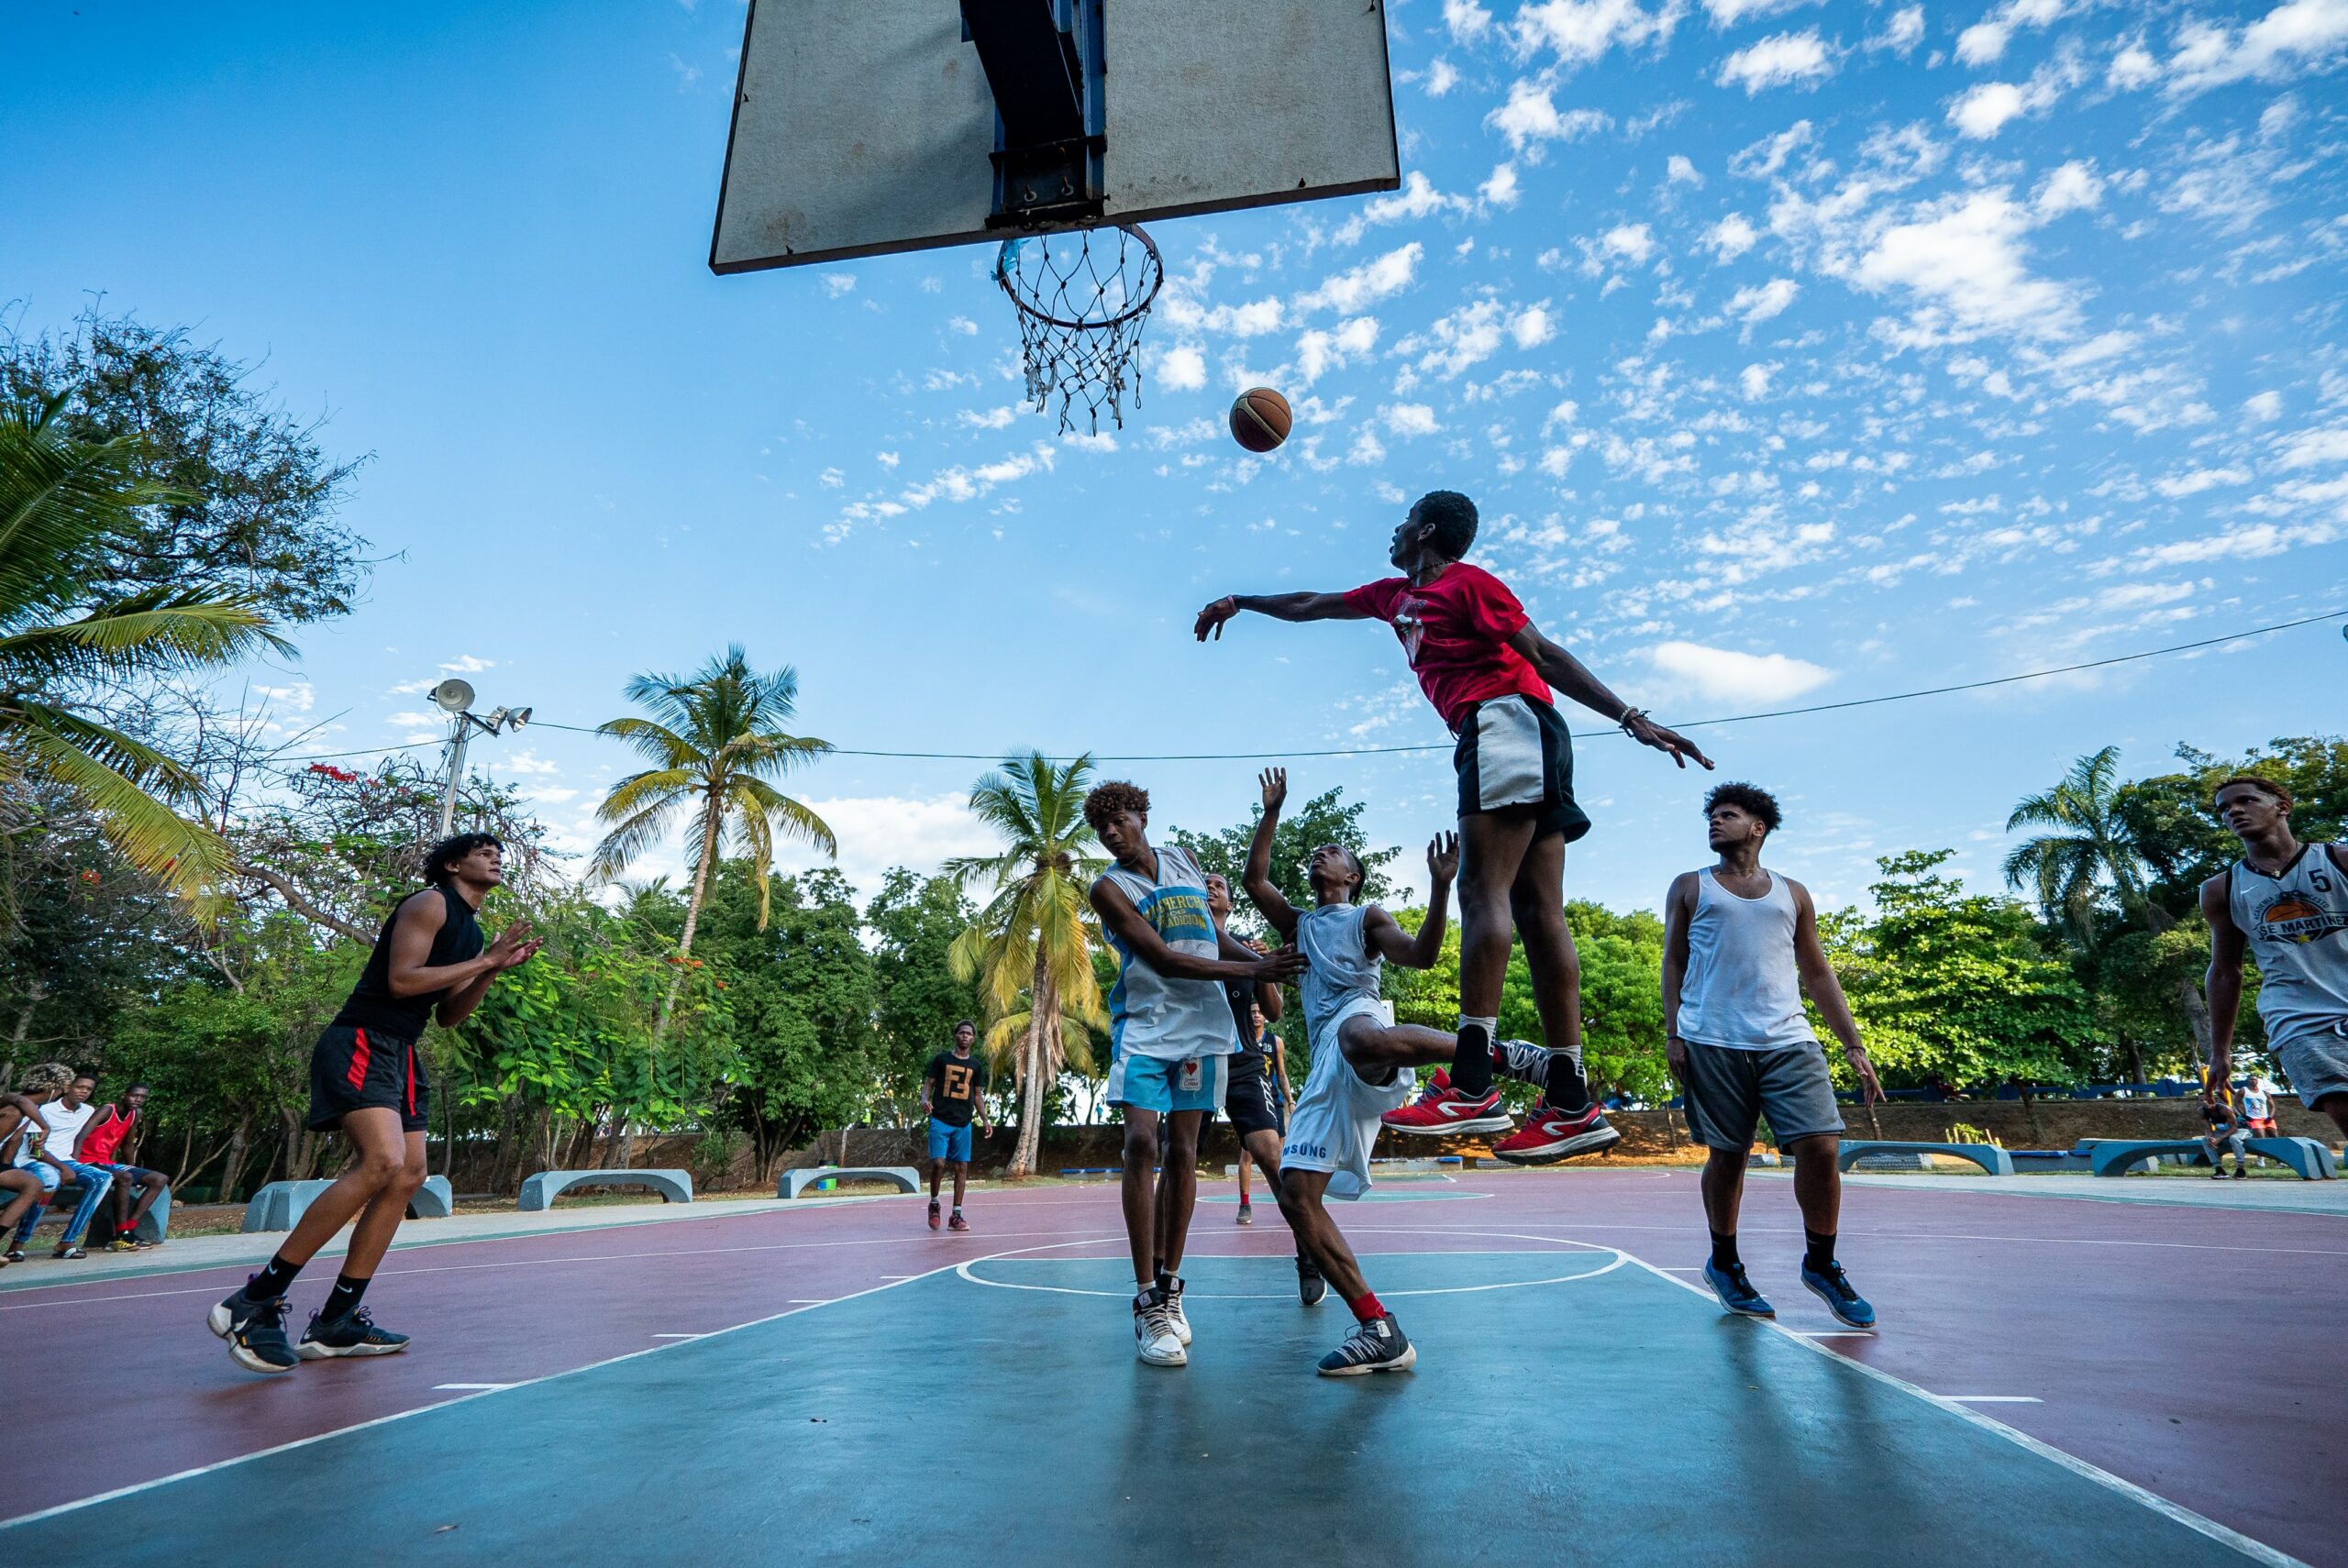 A group of kids playing basketball at a park. This is one of the most popular and inexpensive sports for kids to play.